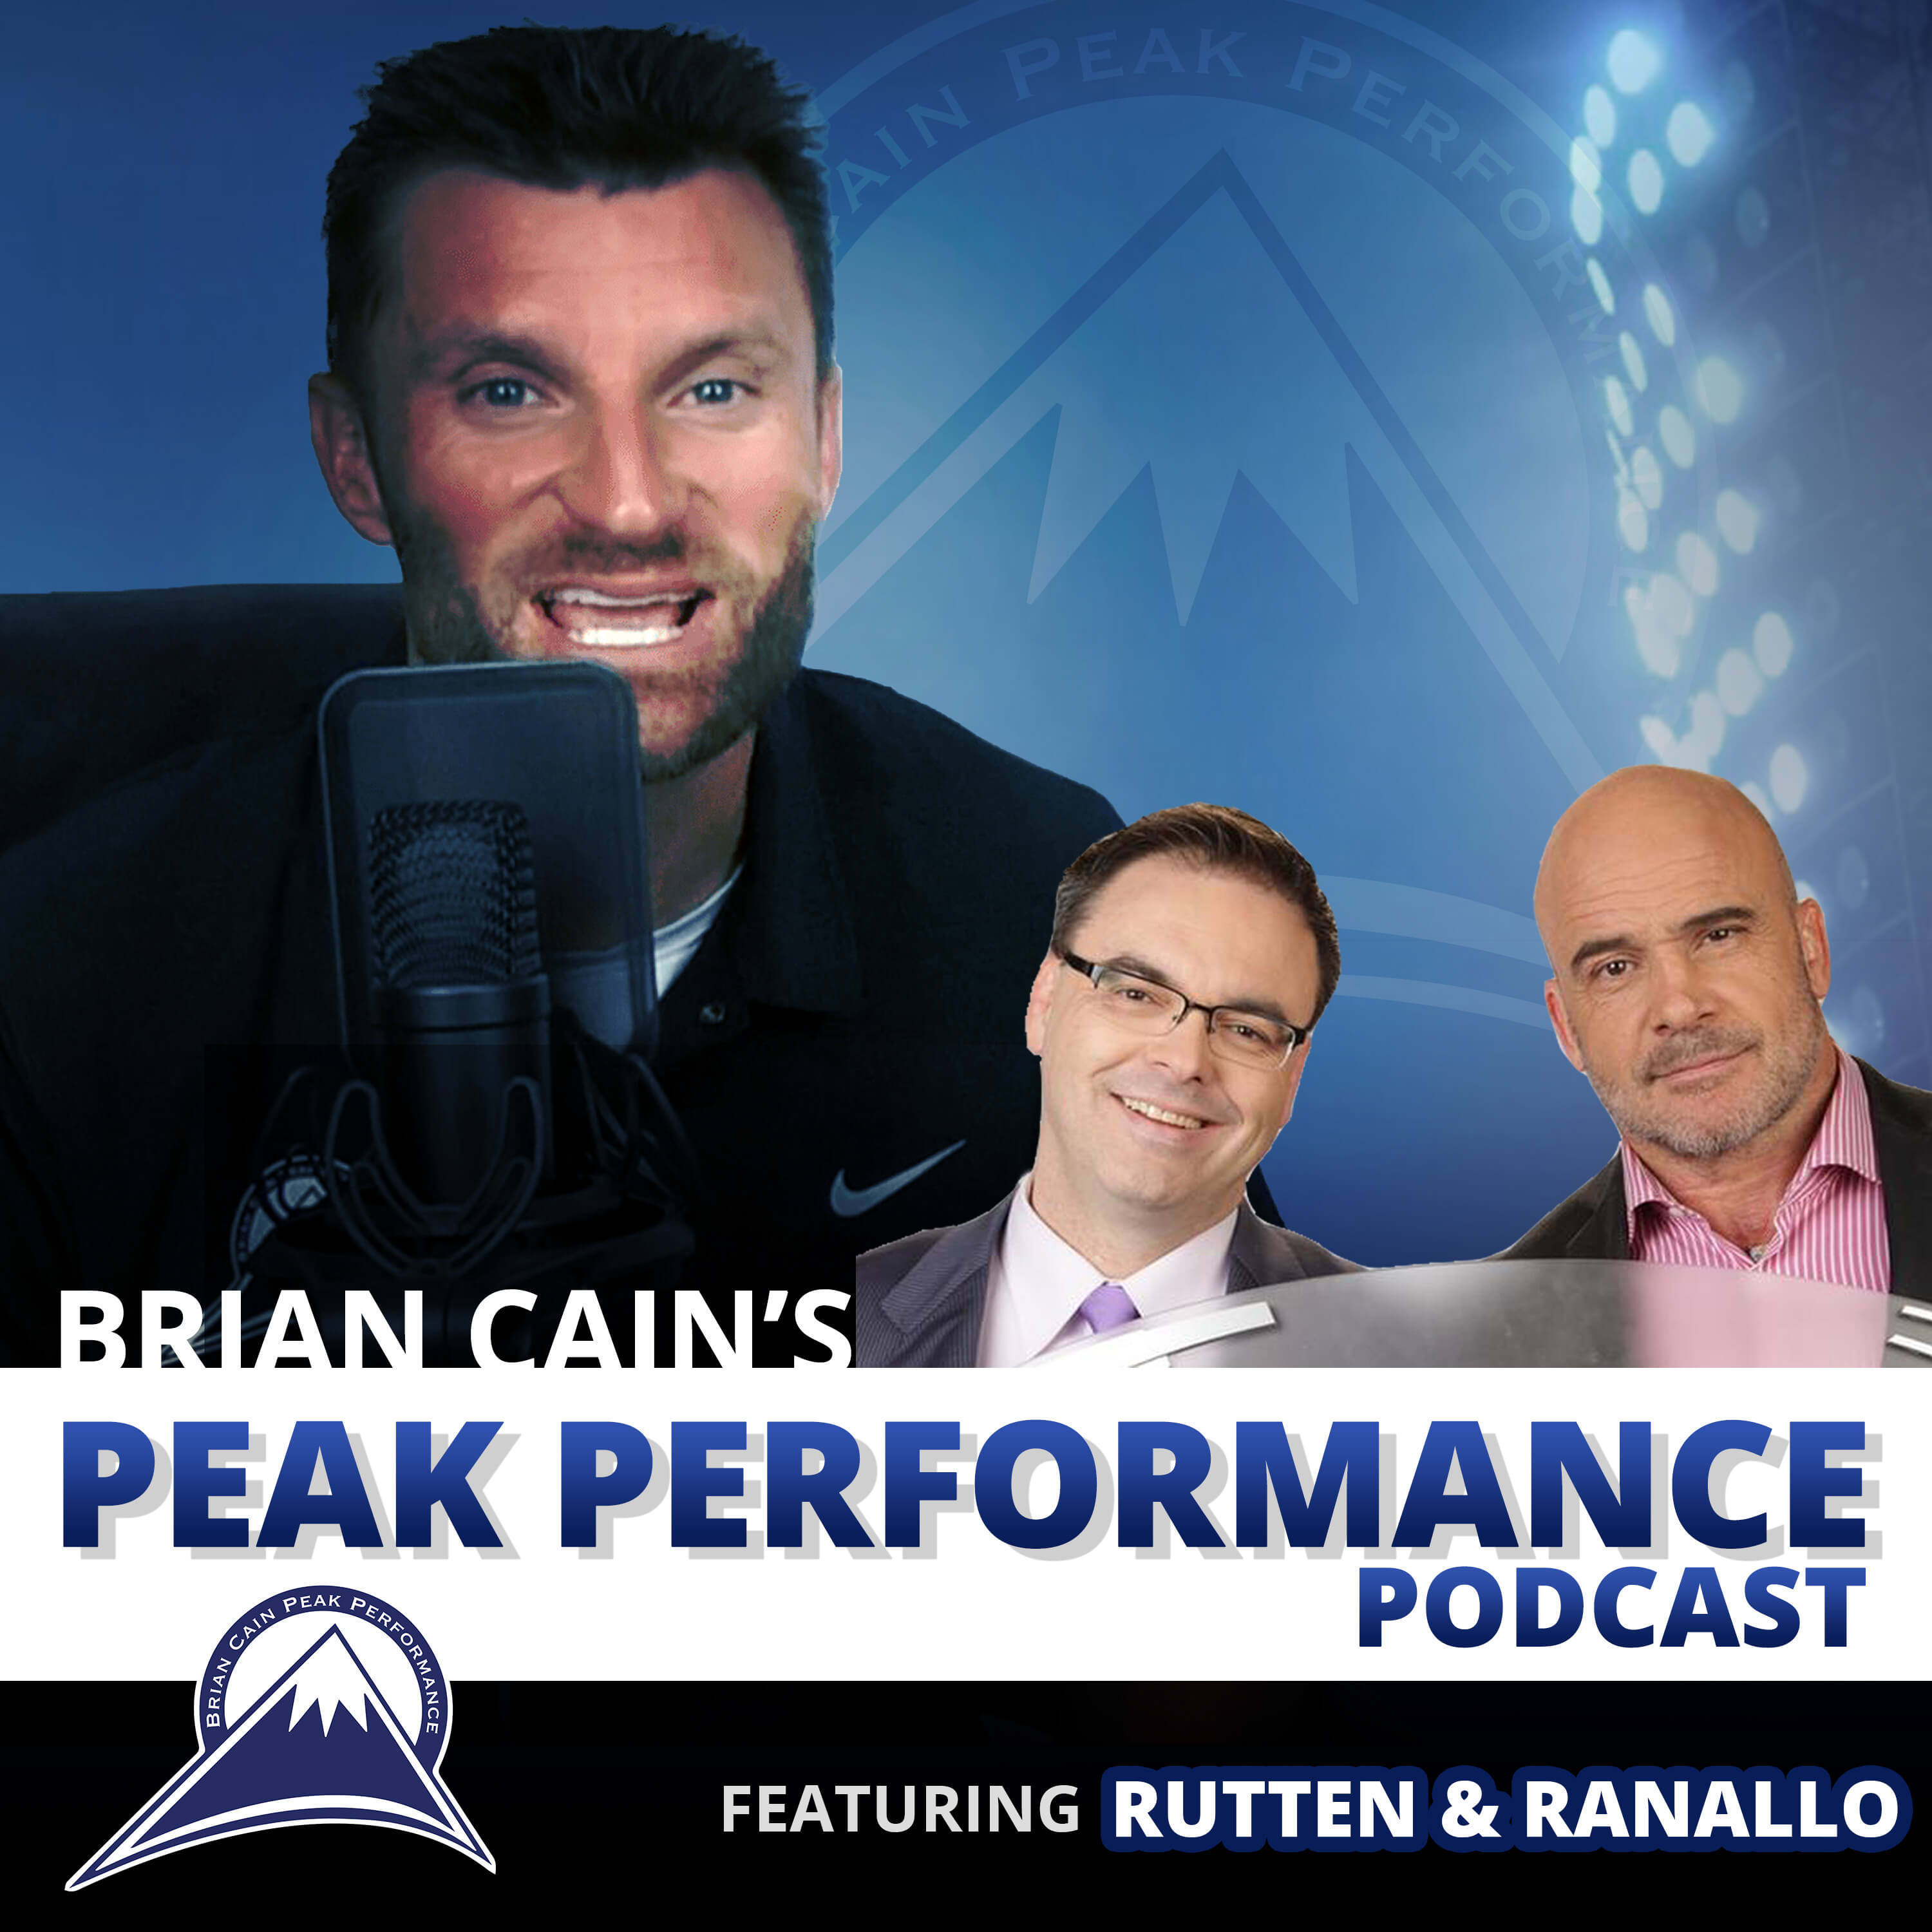 BC 126. Brian Cain On Rutten and Renallo - Cain Talks MMA Mindset WIth The UFC Hall of Famer